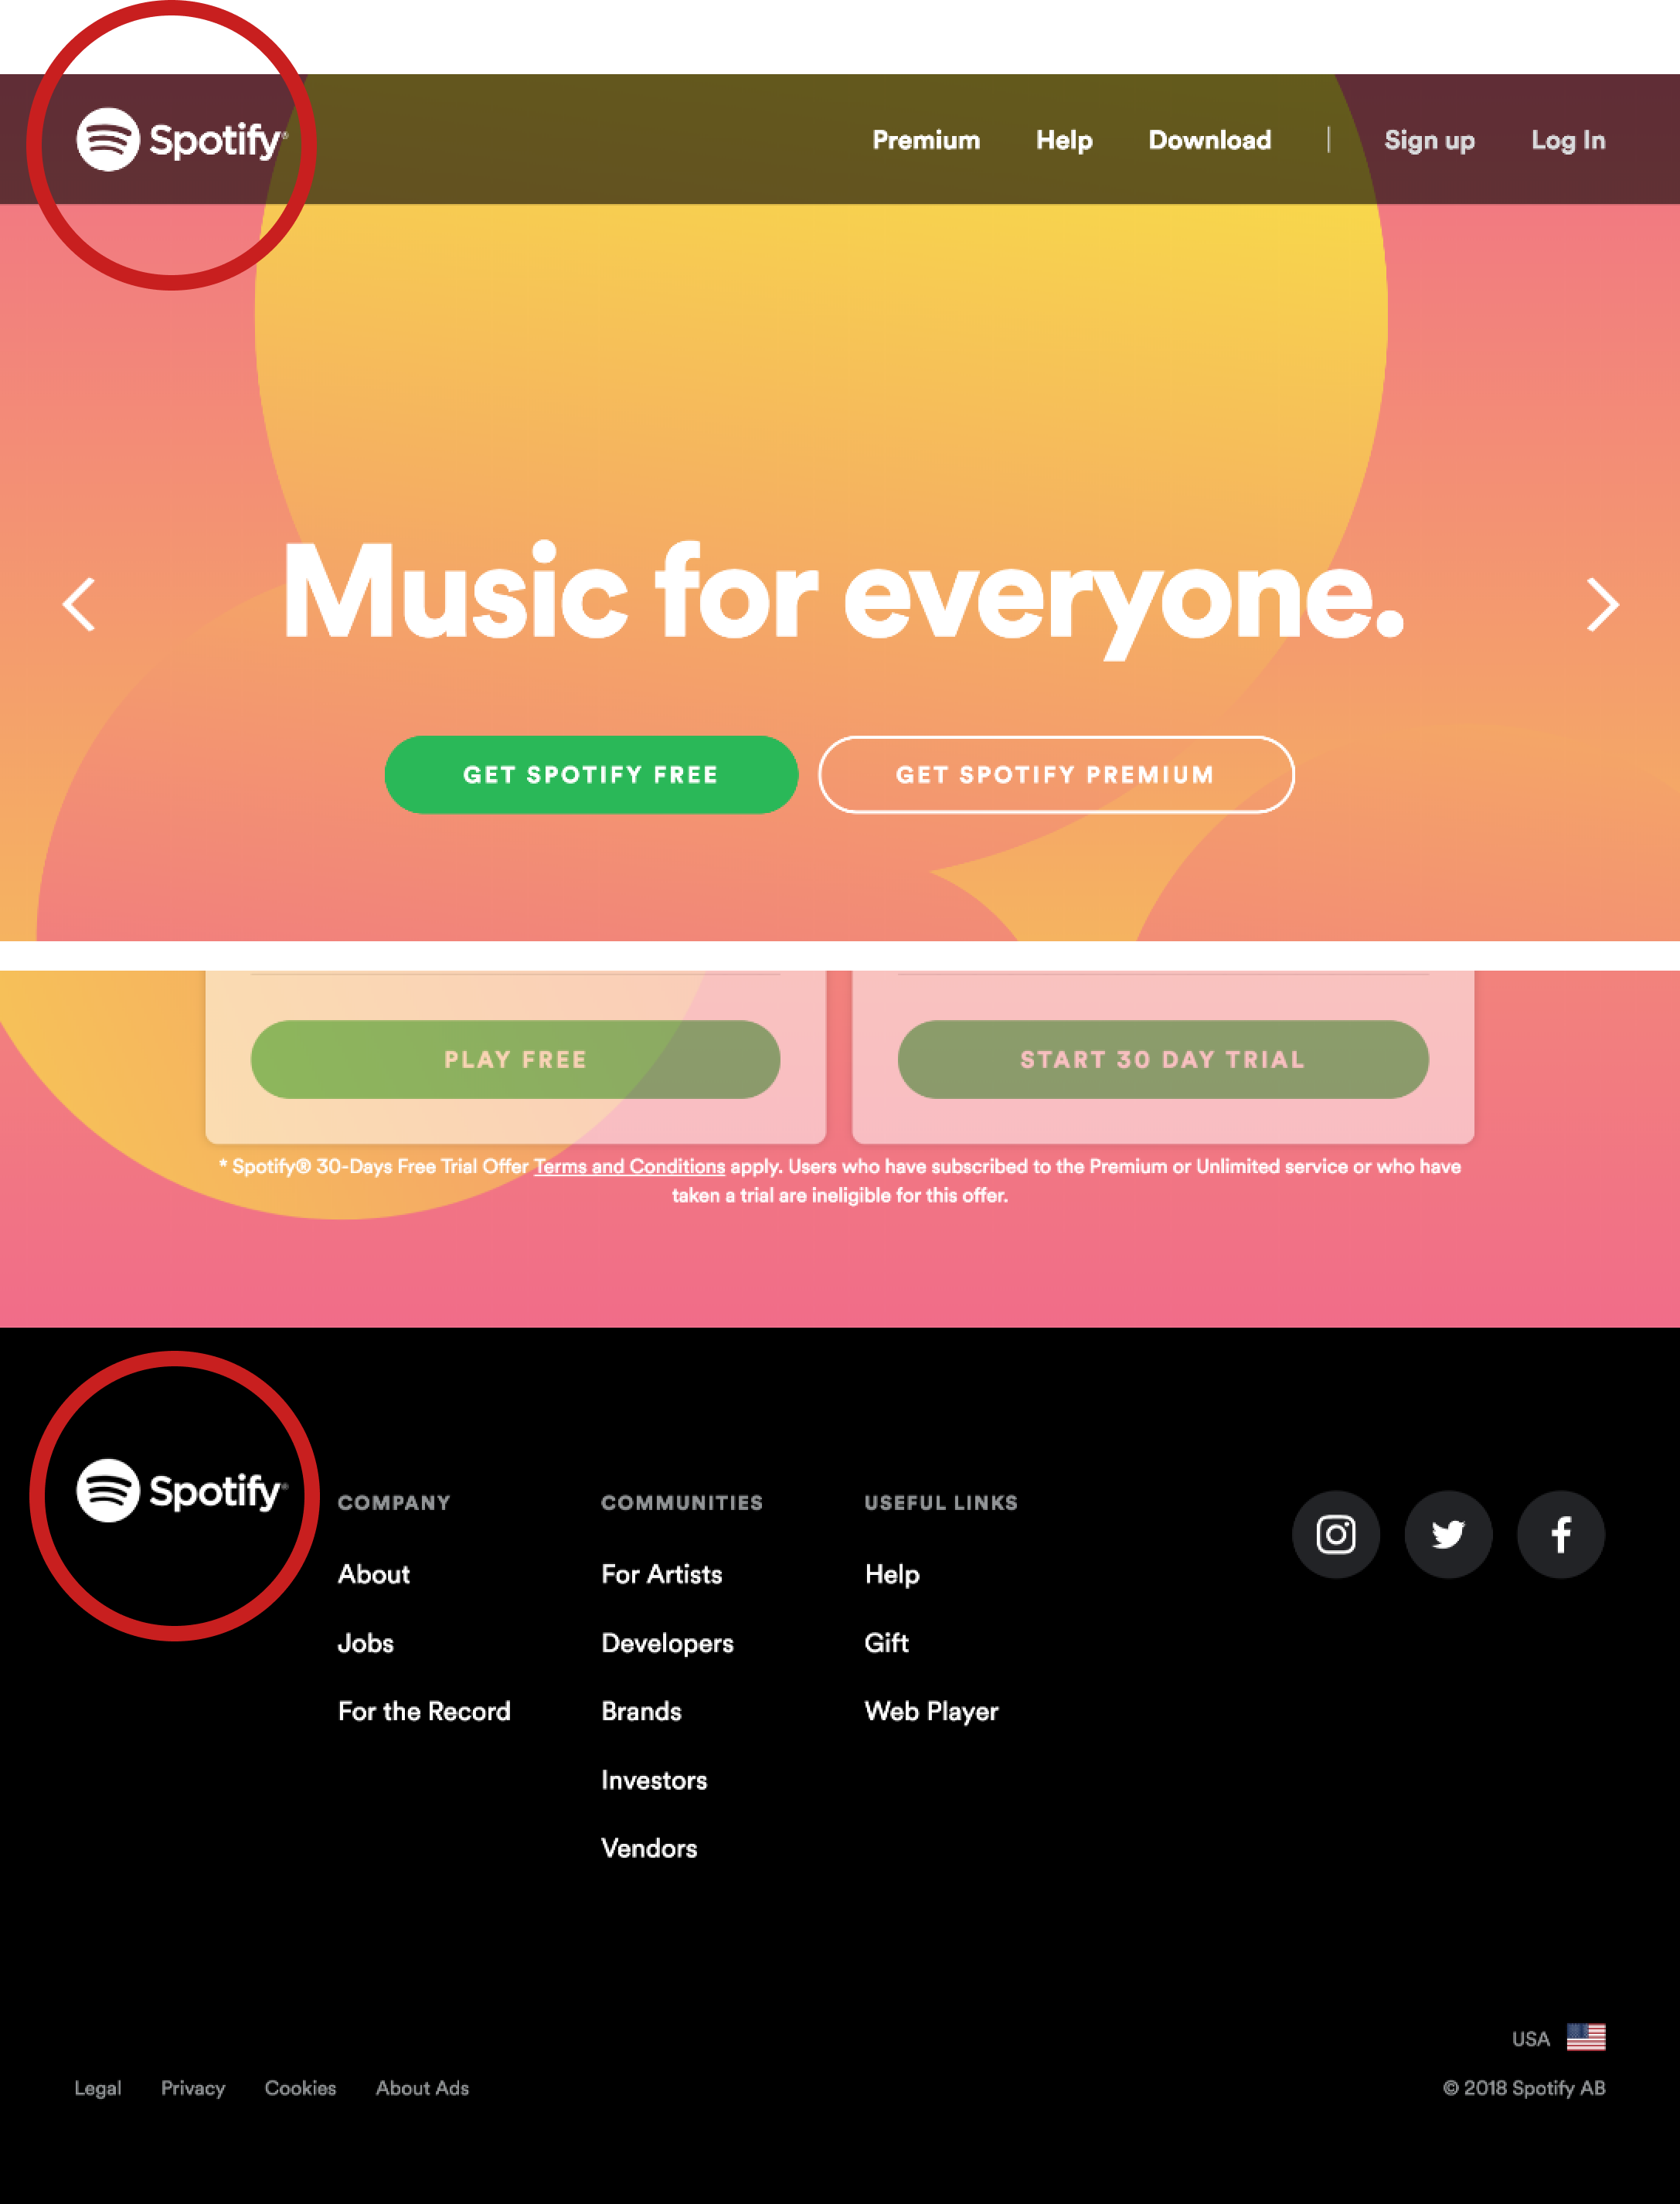 Spotify's home page on www.spotify.com. The logo is shown in the header and the footer